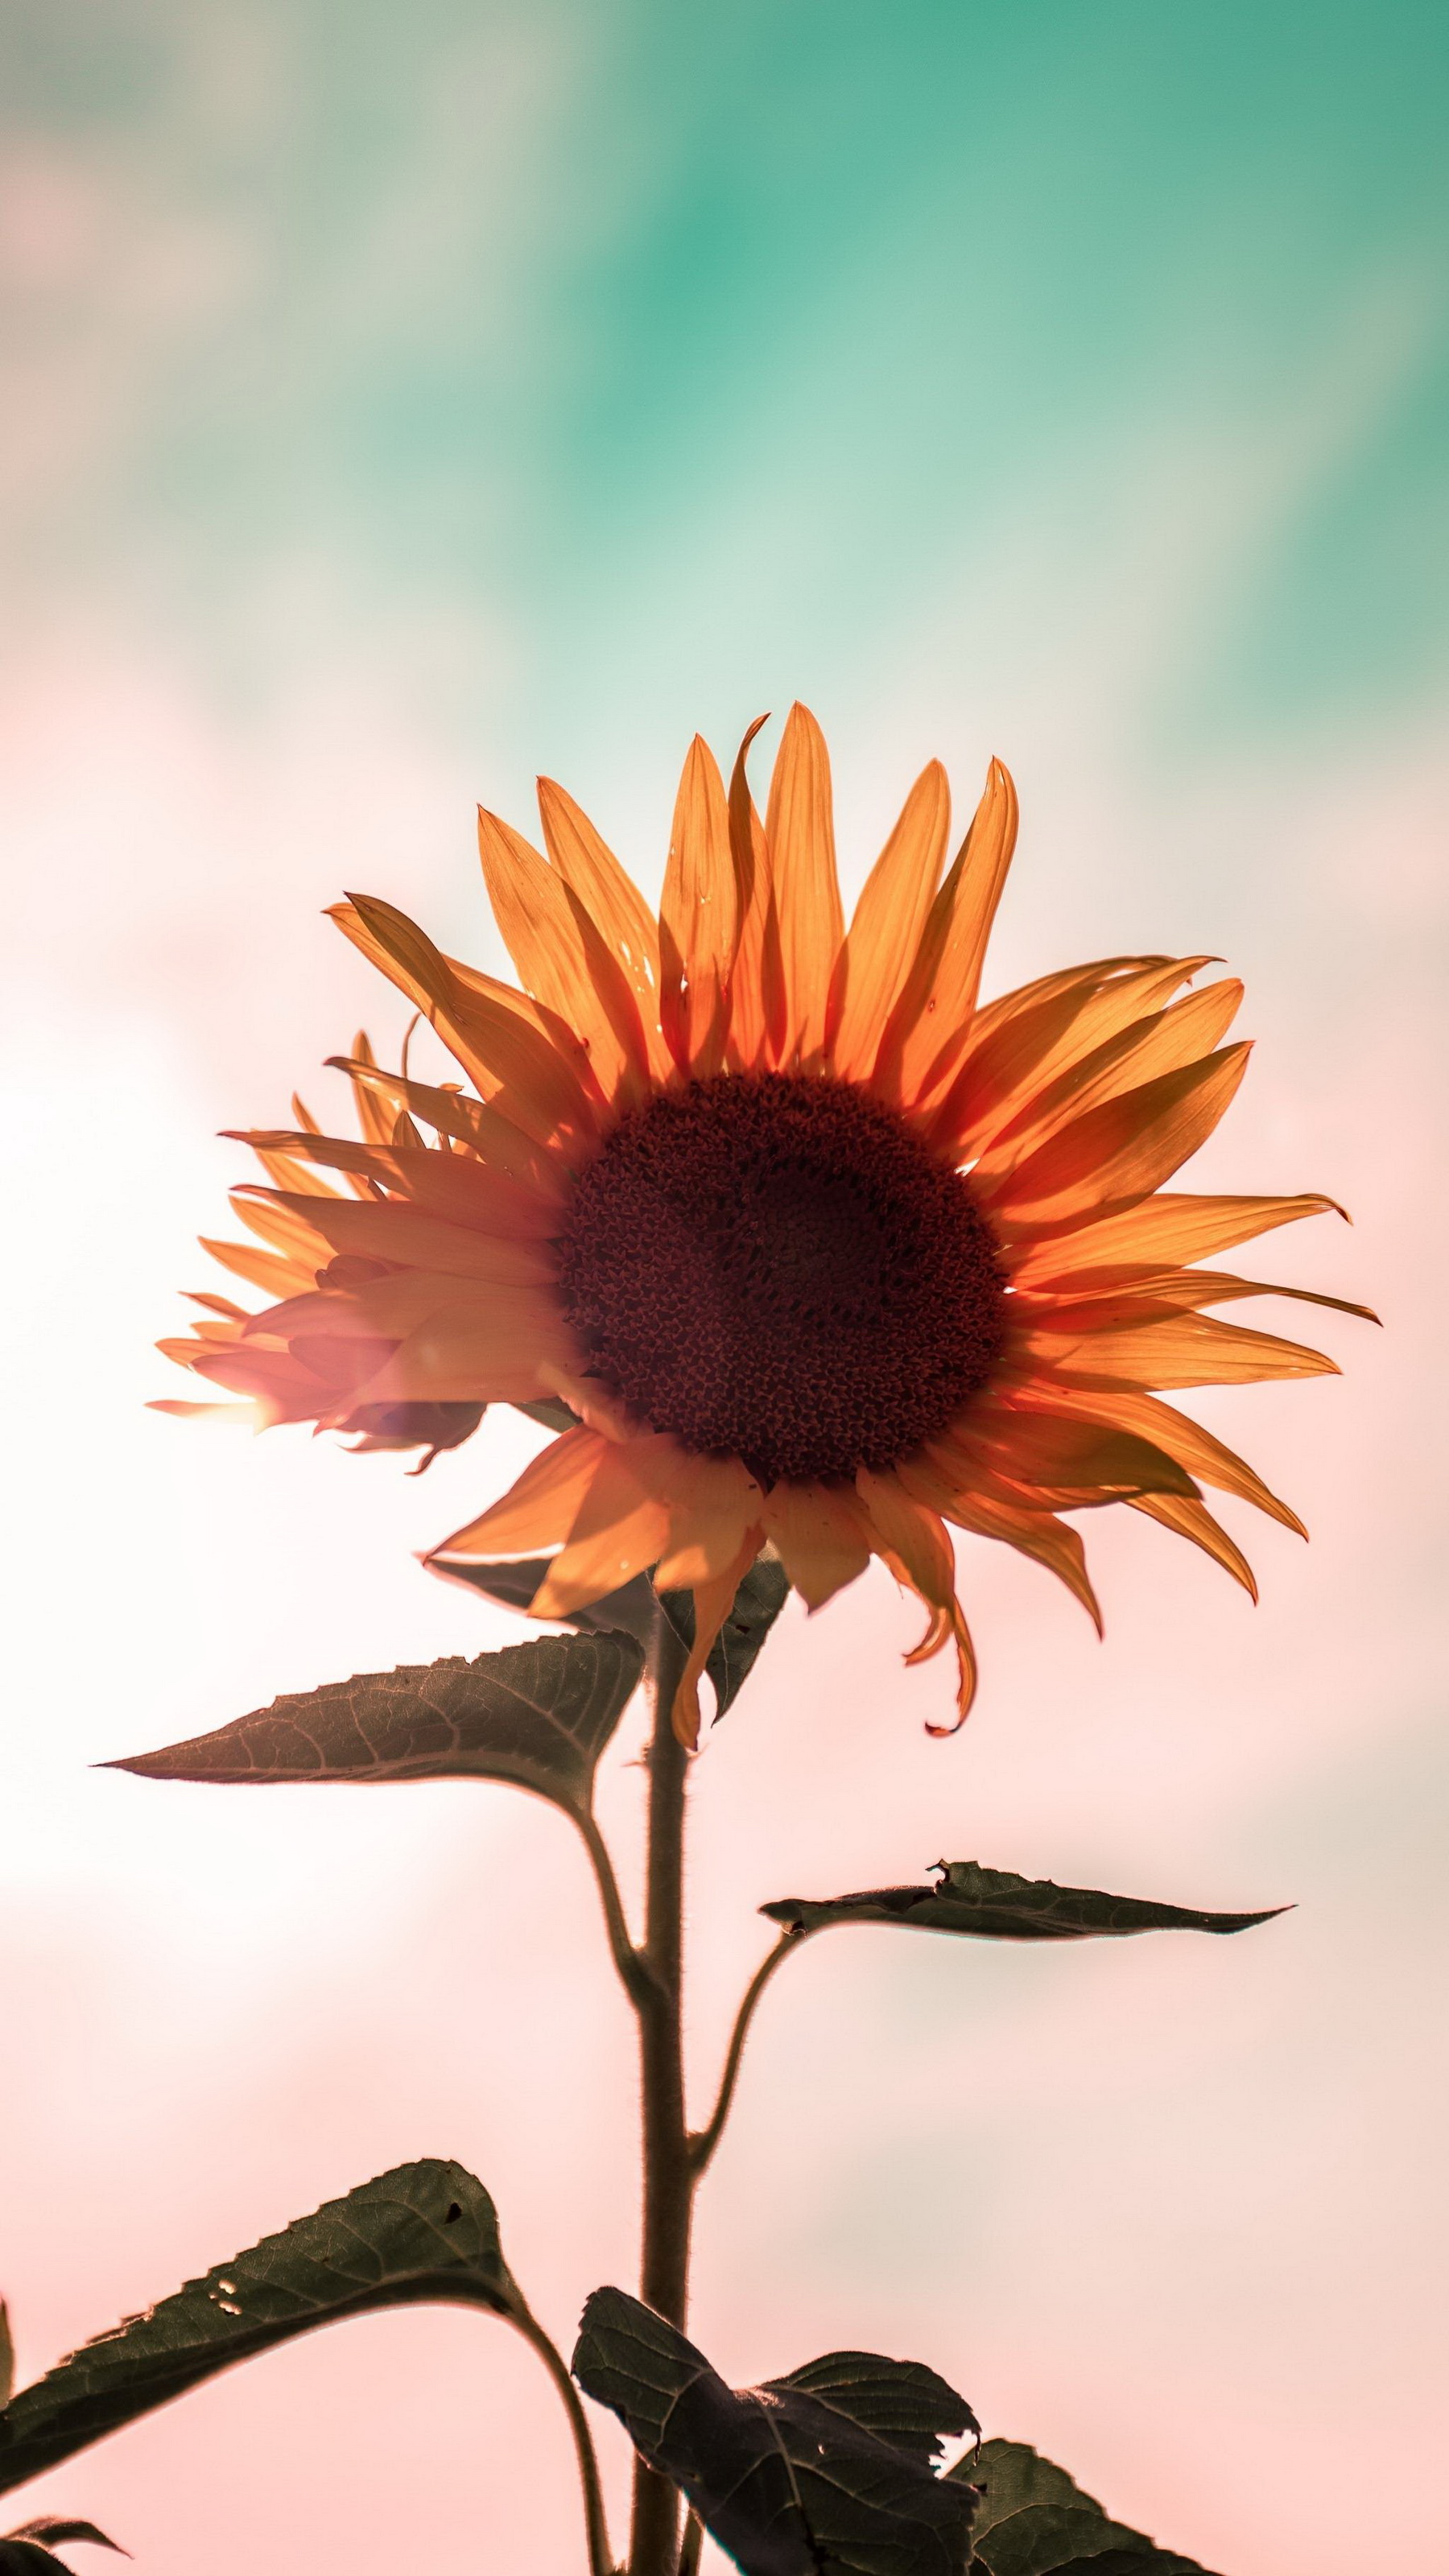 Top 999+ Sunflower Aesthetic Wallpaper Full HD, 4K✓Free to Use